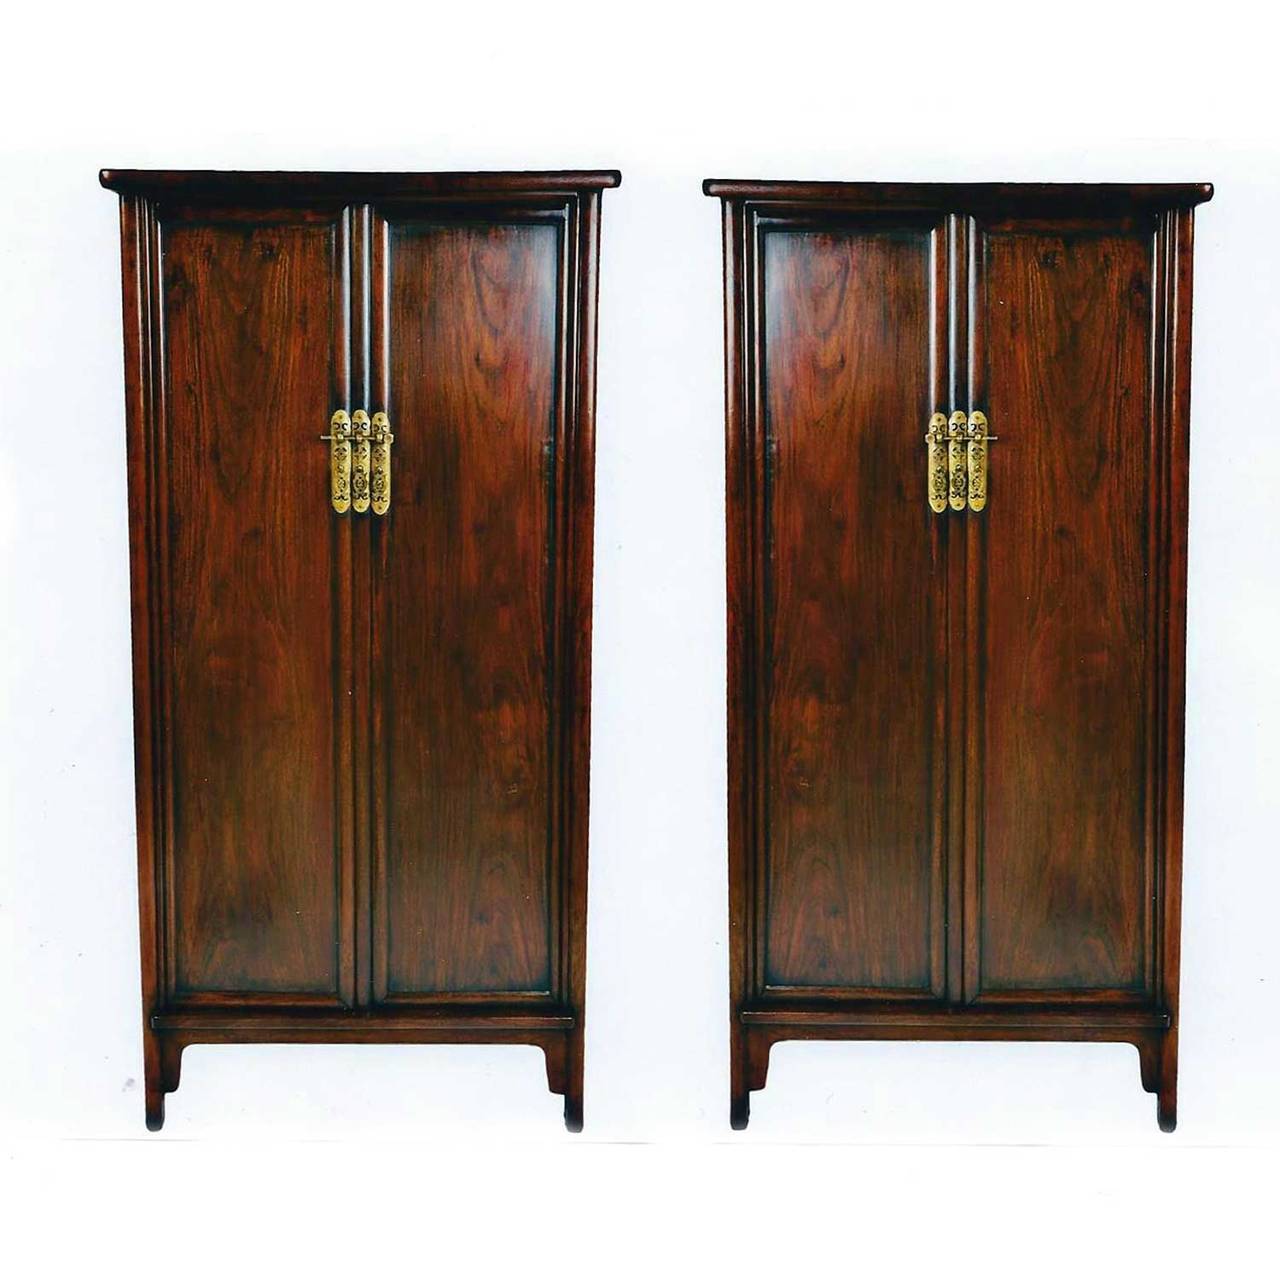 A rare Pair of Early 19th. Century Chinese Rosewood Cabinets, 
The rounded corners are typical of the Ming Dynasty design from which these are derived. The linear design from the slight tapering presents a visual aspect that is both graceful and